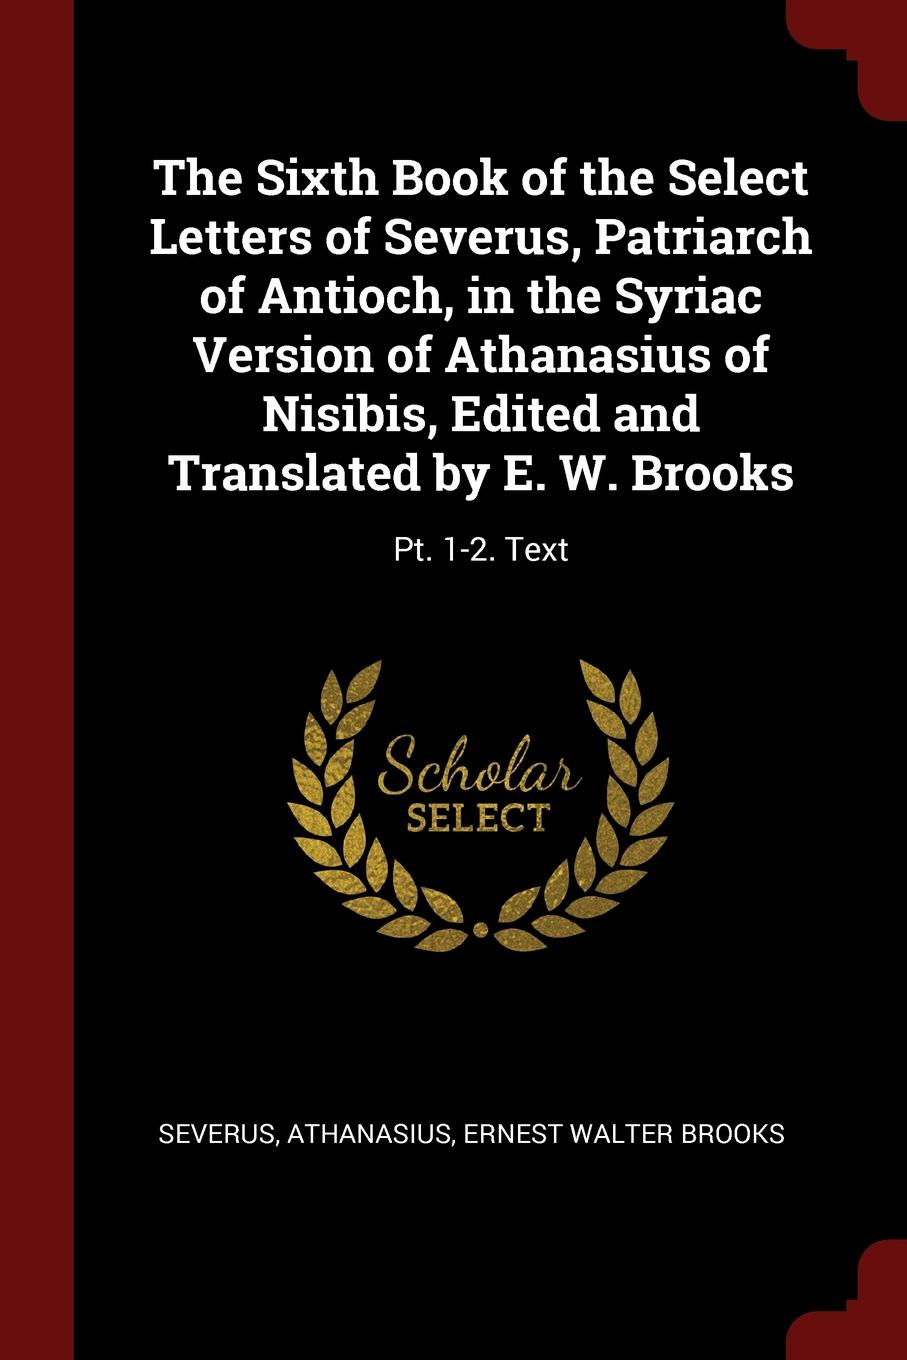 The Sixth Book of the Select Letters of Severus, Patriarch of Antioch, in the Syriac Version of Athanasius of Nisibis, Edited and Translated by E. W. Brooks. Pt. 1-2. Text